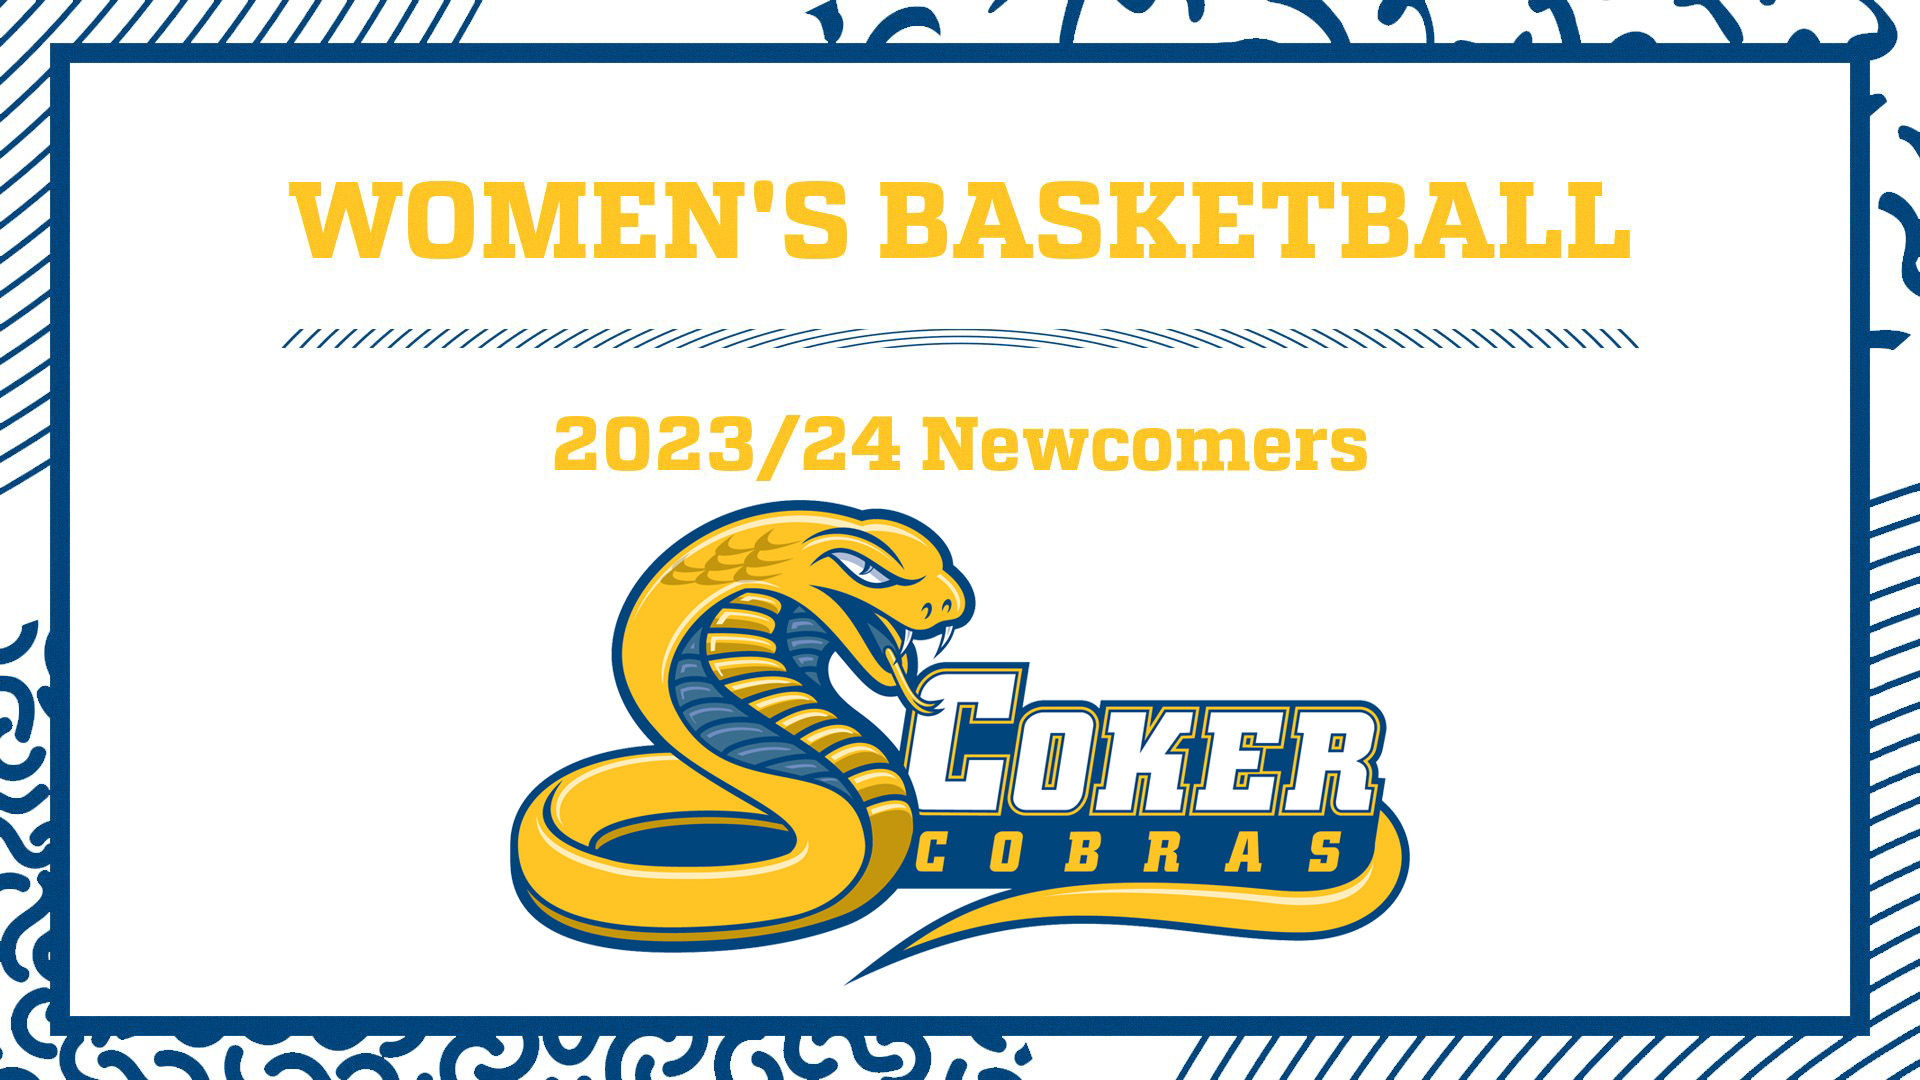 Women's Basketball Announces 2023/24 Newcomers